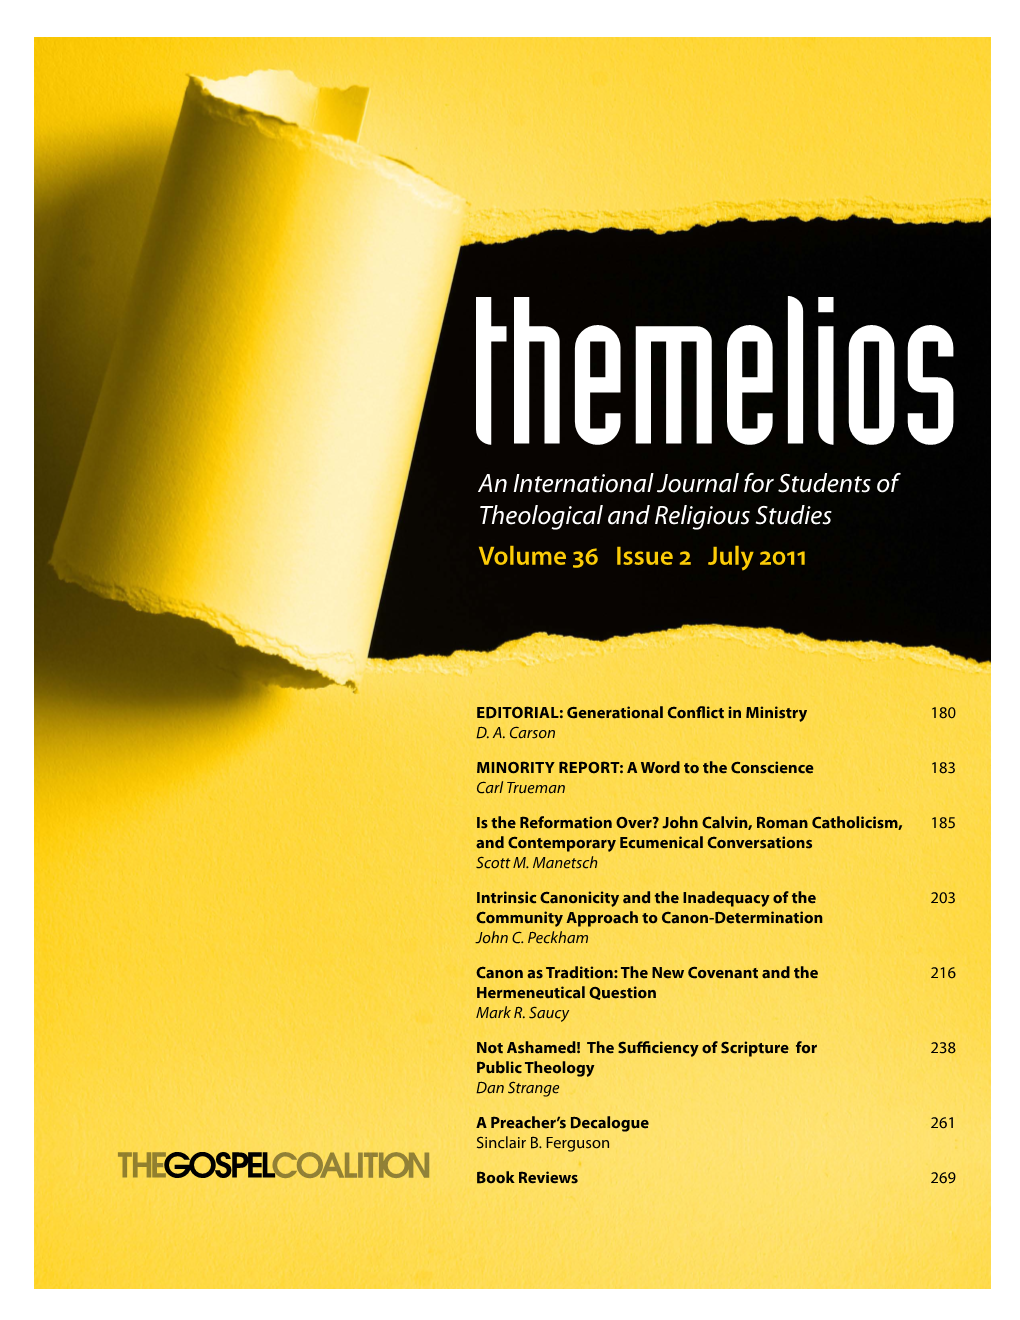 An International Journal for Students of Theological and Religious Studies Volume 36 Issue 2 July 2011